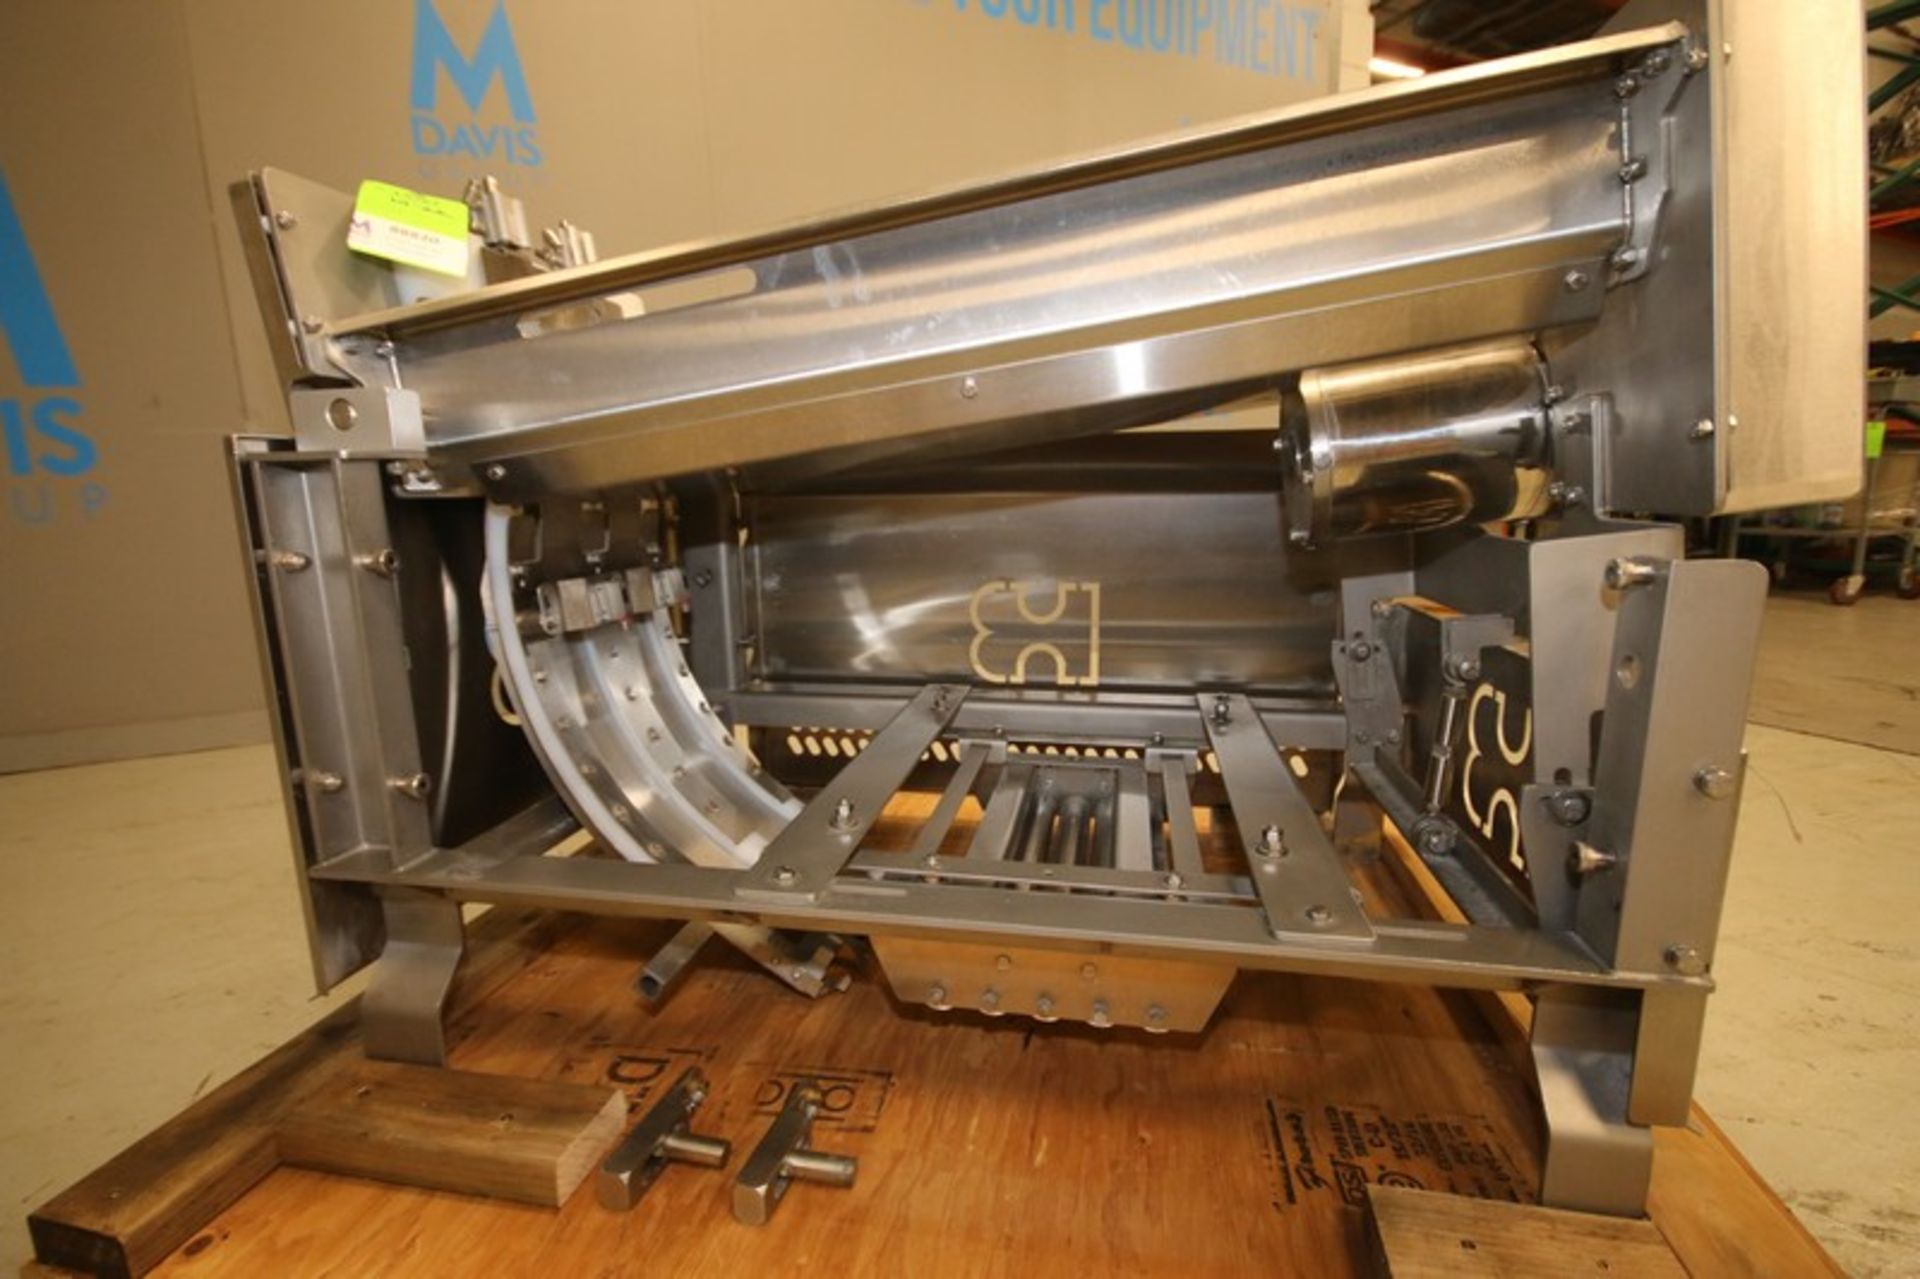 Hinds-bock S/S Lid Applicator For Cup Filling Line (INV#88820)(Located @ the MDG Showroom in Pgh., - Image 2 of 6